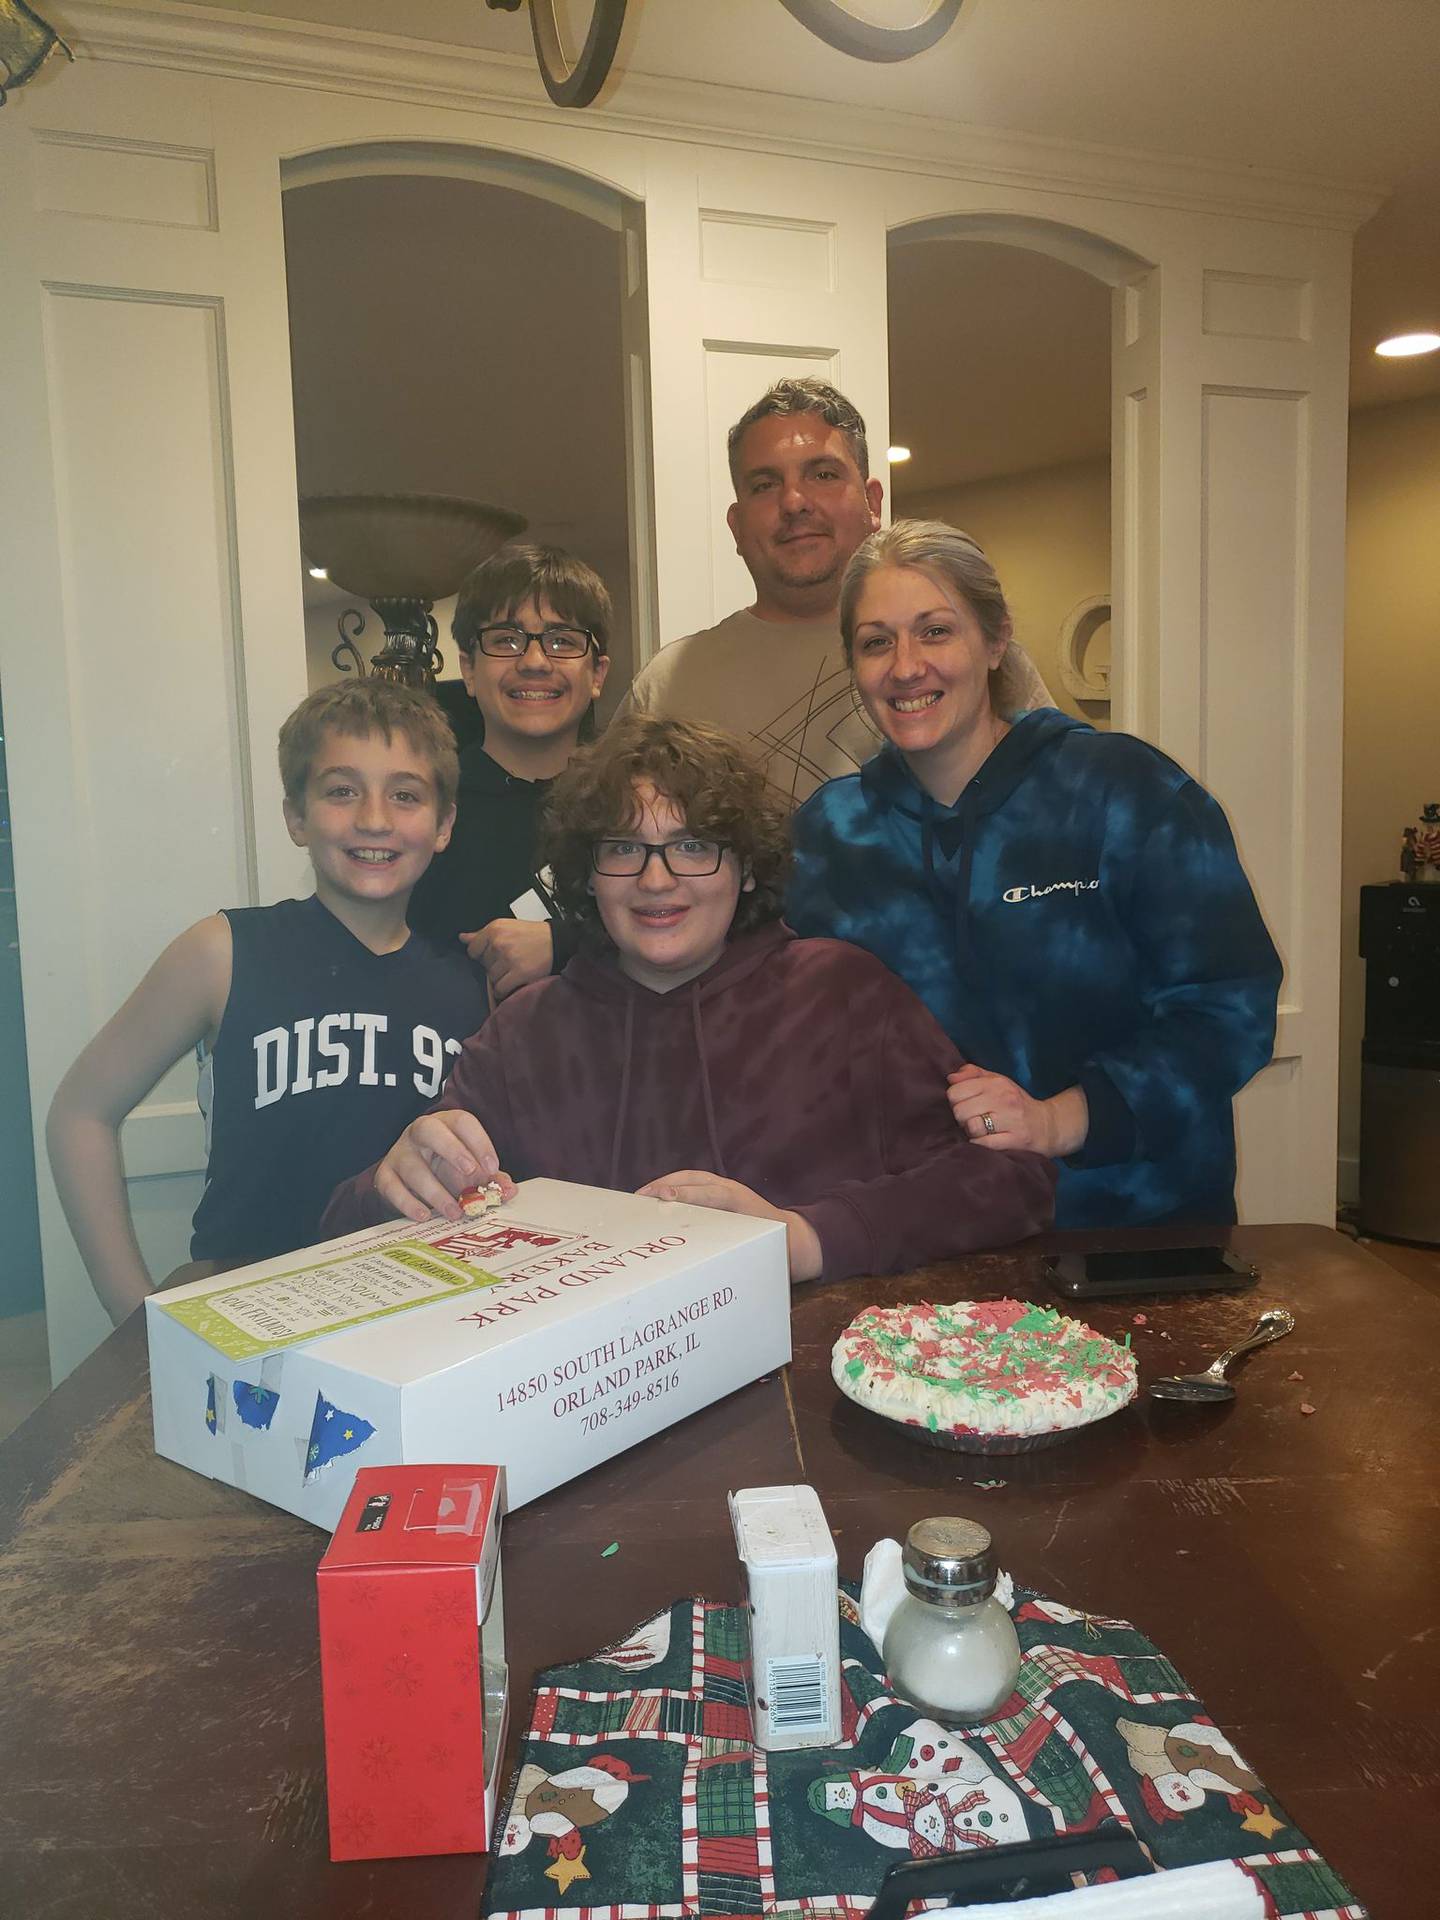 Vinnie Gincauskas, 15, of Lockport (seated, center) has a rare soft tissue cancer called desmoplastic small round cell tumors or DSRCT. The cancer is aggressive but so is his treatment. He is pictured with his parents Nick and Mary Ellen Gincauskas and his brothers (from left) Dominic and Joseph.